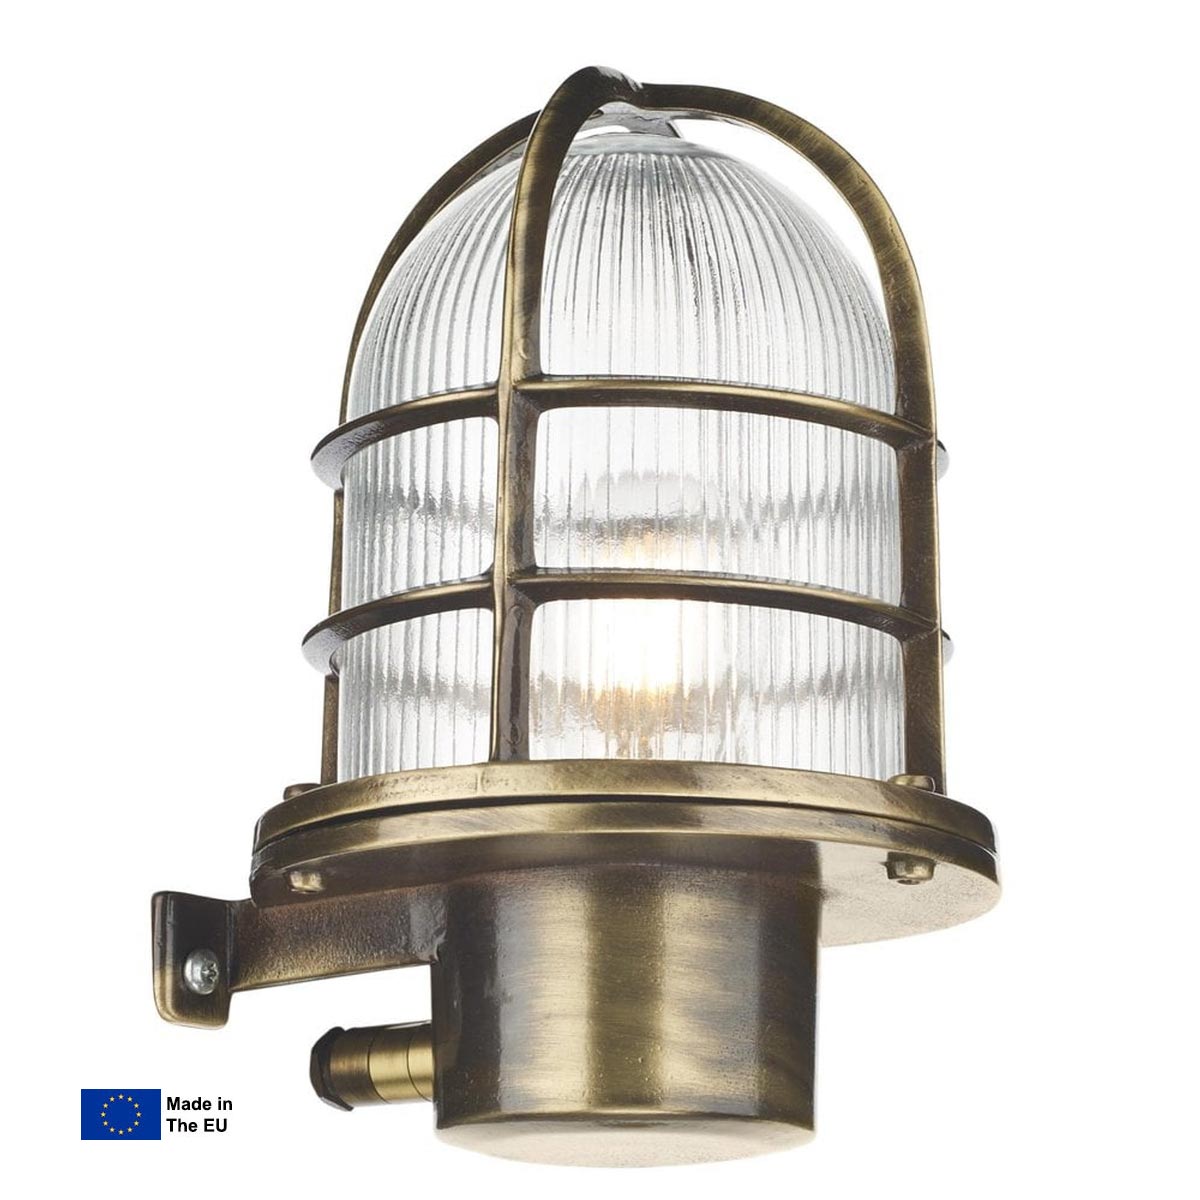 Pier Small Nautical Outdoor Wall Light Solid Antique Brass